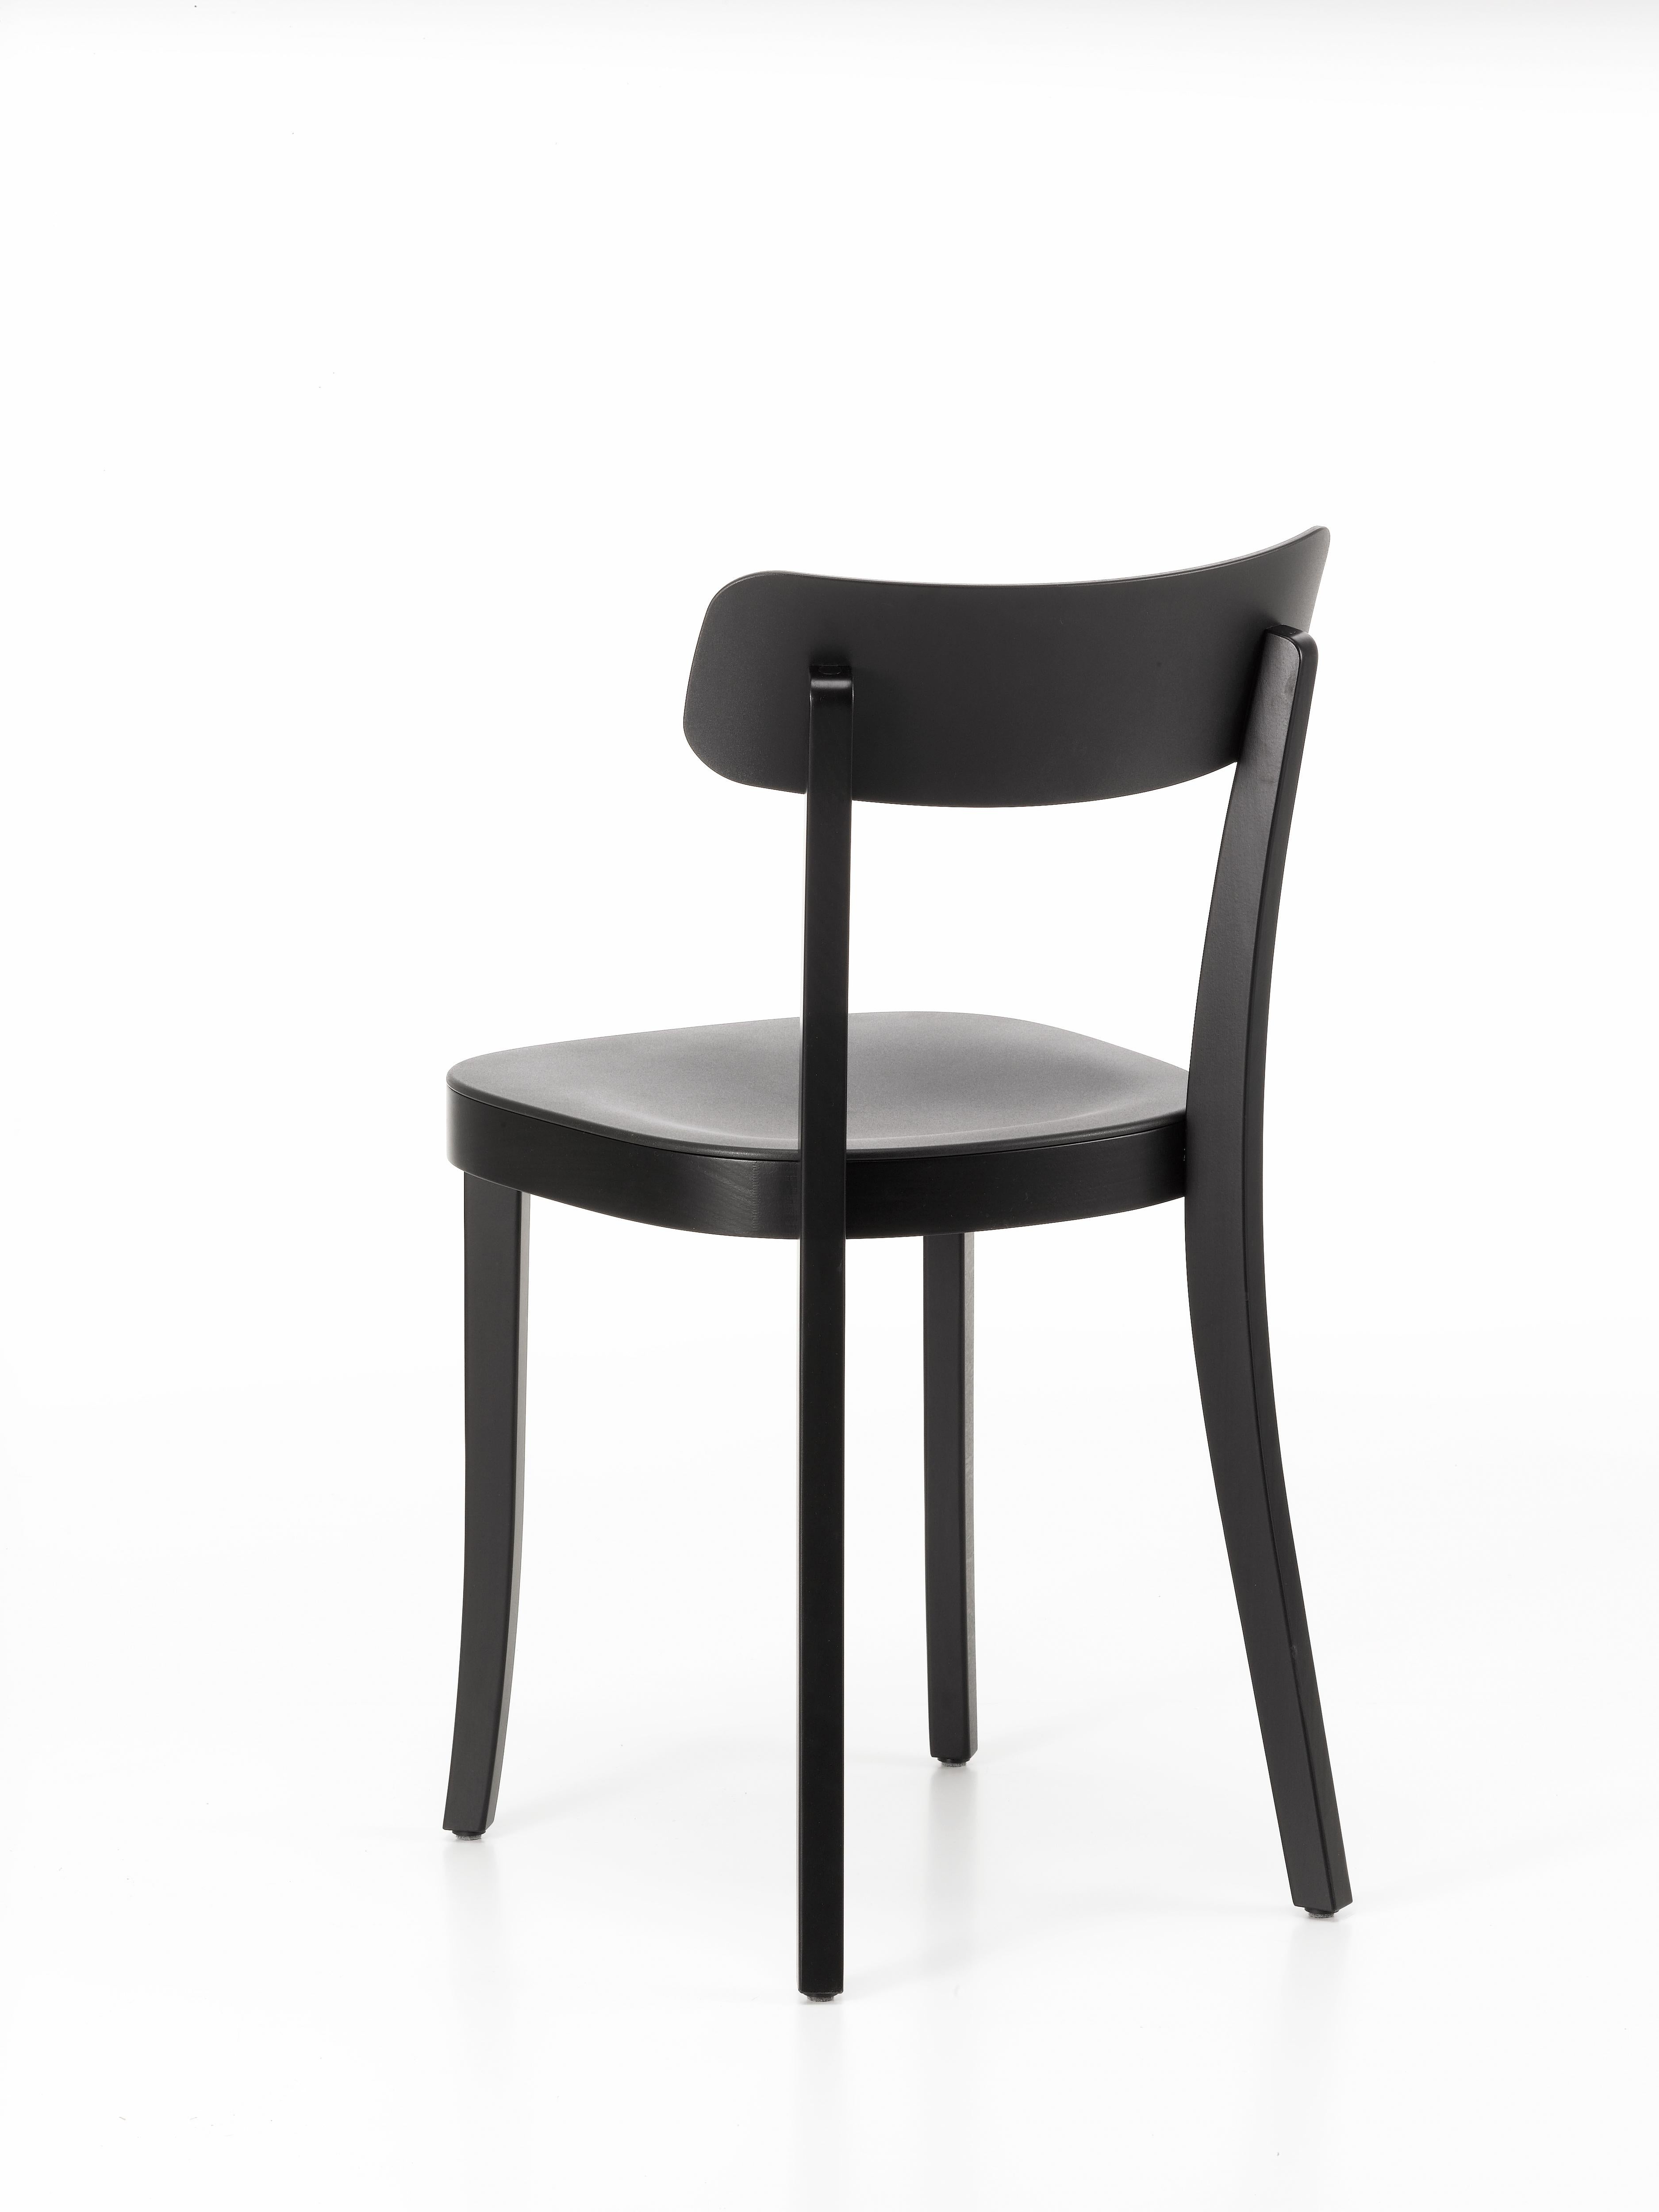 These products are only available in the United States.

 With the Basel Chair, Jasper Morrison renews the Classic genre of simple wooden chairs, which have been industrially produced over the past 100 years in great quantity and variety. The eye is